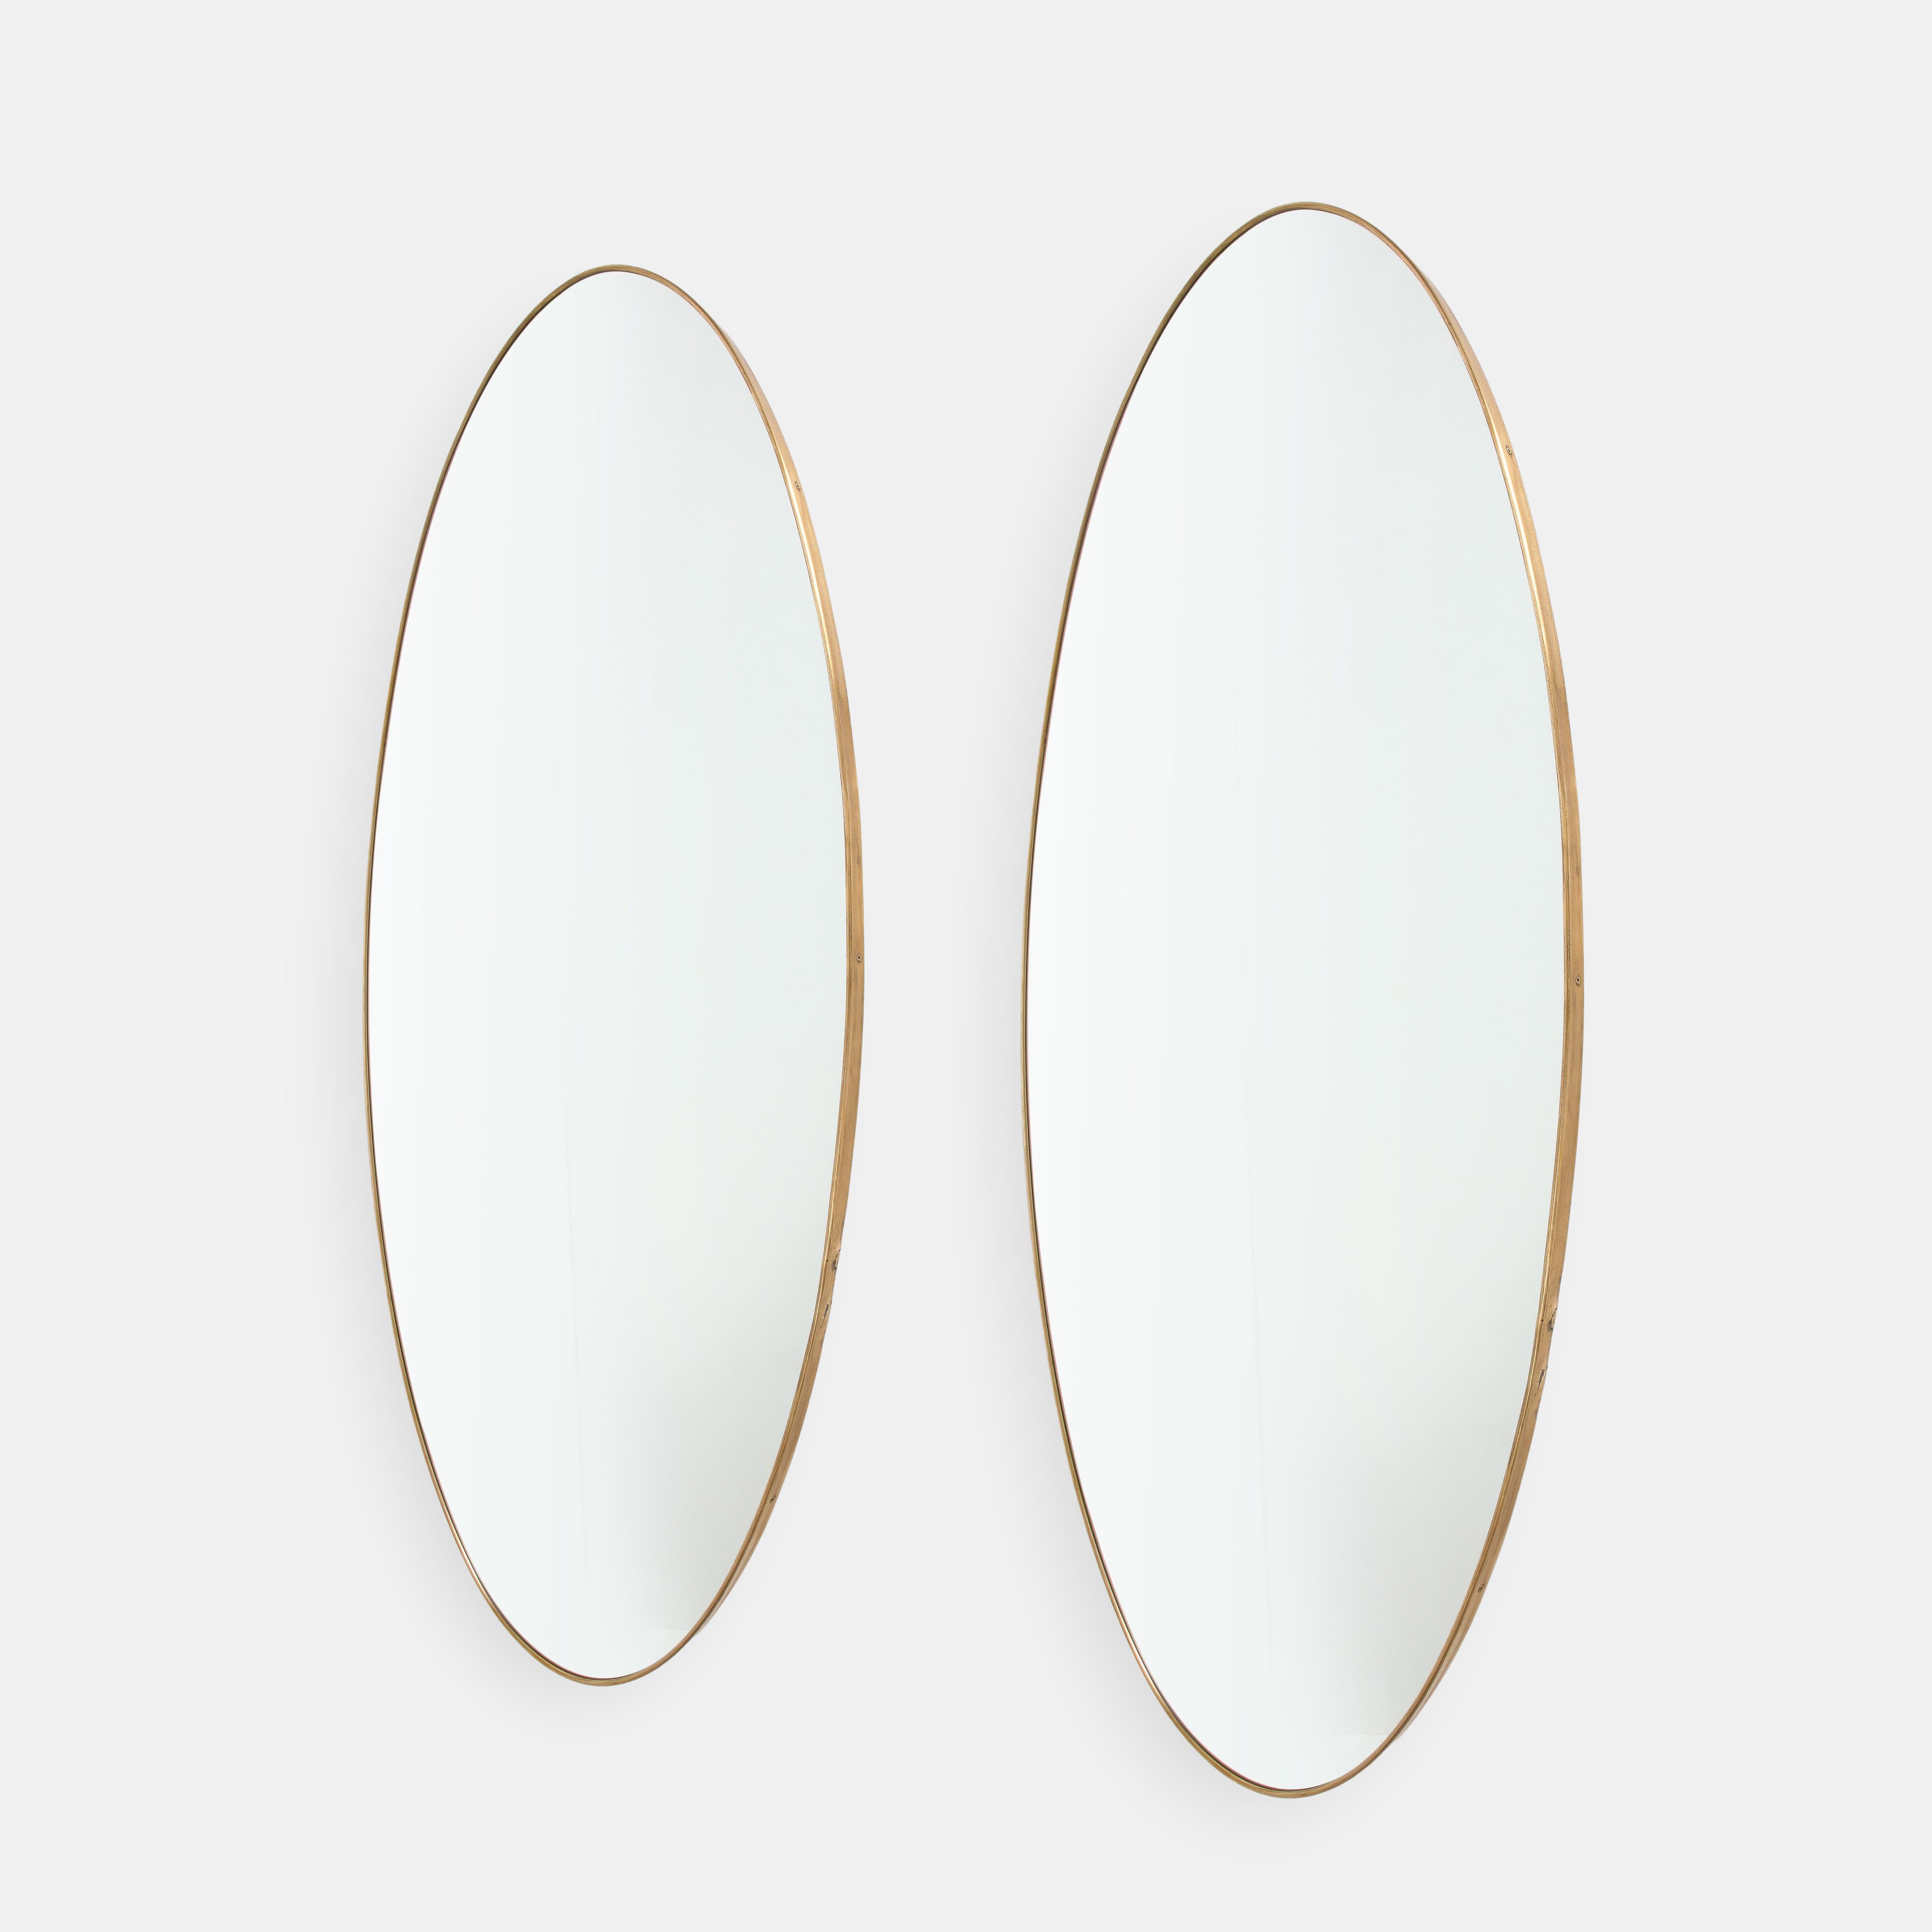 1950s Italian rare pair of grand scale oval wall mirrors. These elegant mirrors are large and striking in size and have a beautiful rich patinated shaped brass frames and solid construction with wood backing. This monumental size brass mirror is